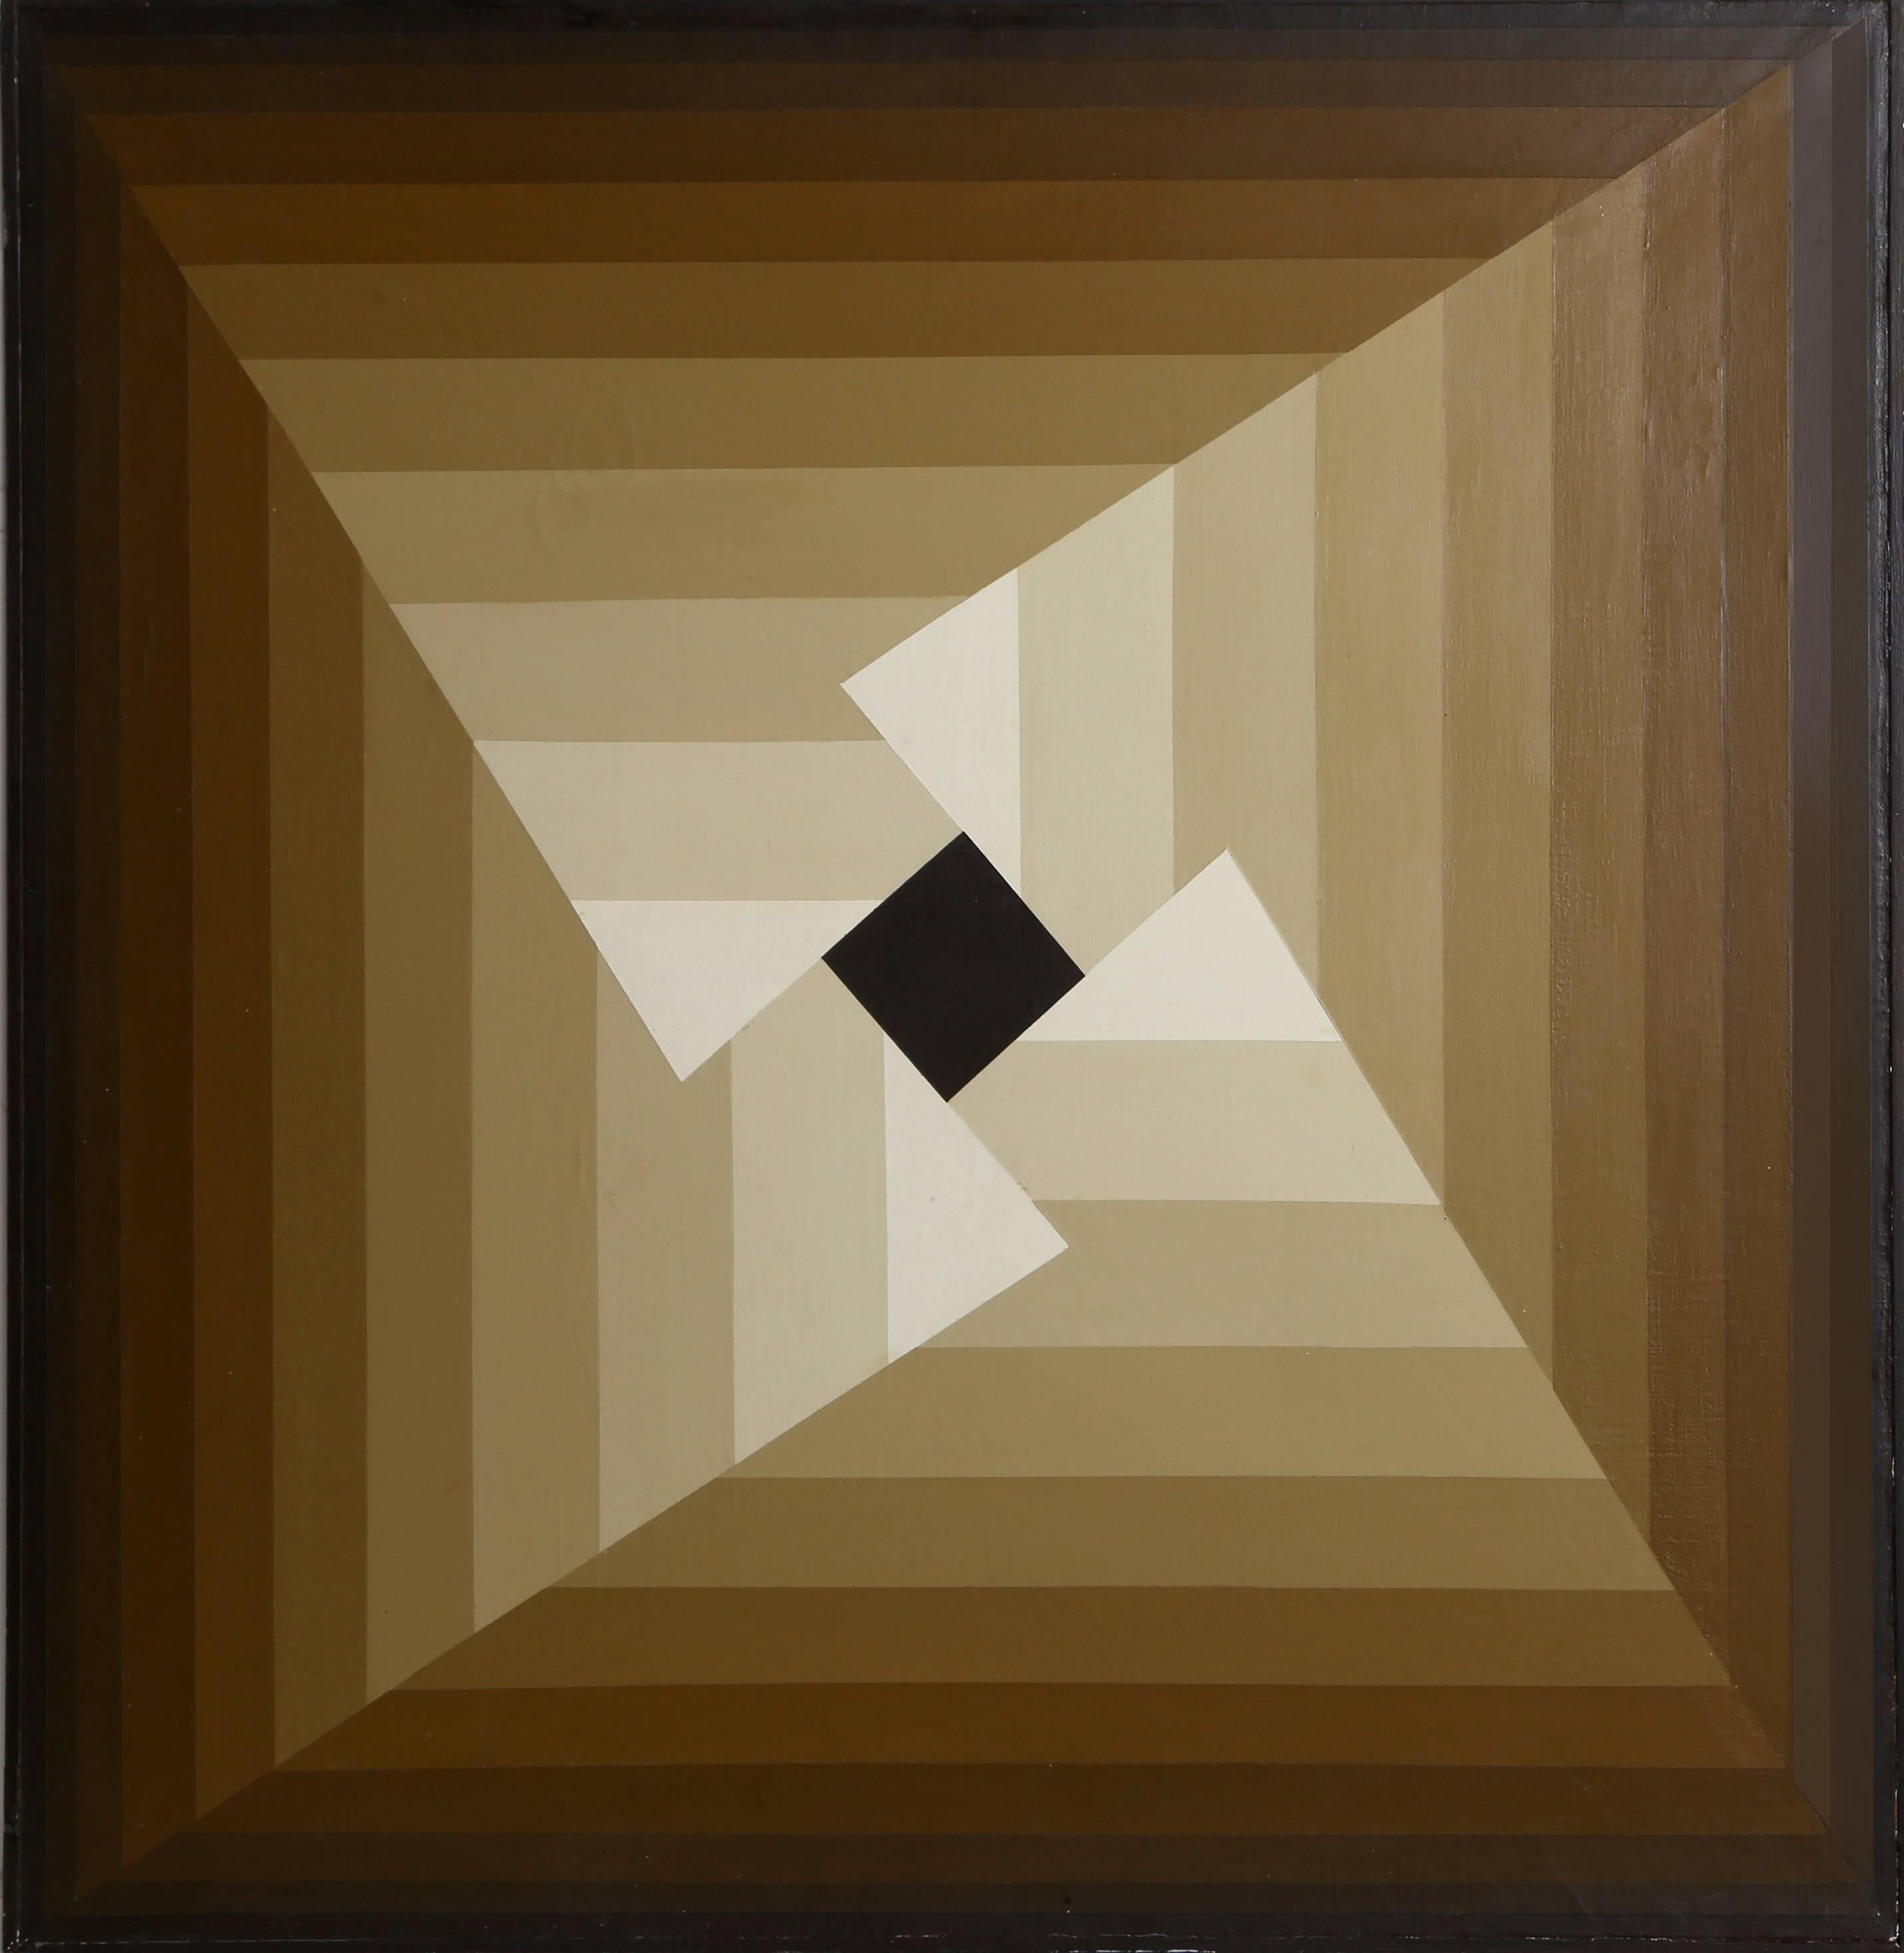 Artist: Roy Ahlgren, American (1927 - 2011)
Title: Aperture
Year: 1976
Medium: Acrylic on Canvas, signed verso
Size: 30 x 30 in. (76.2 x 76.2 cm)